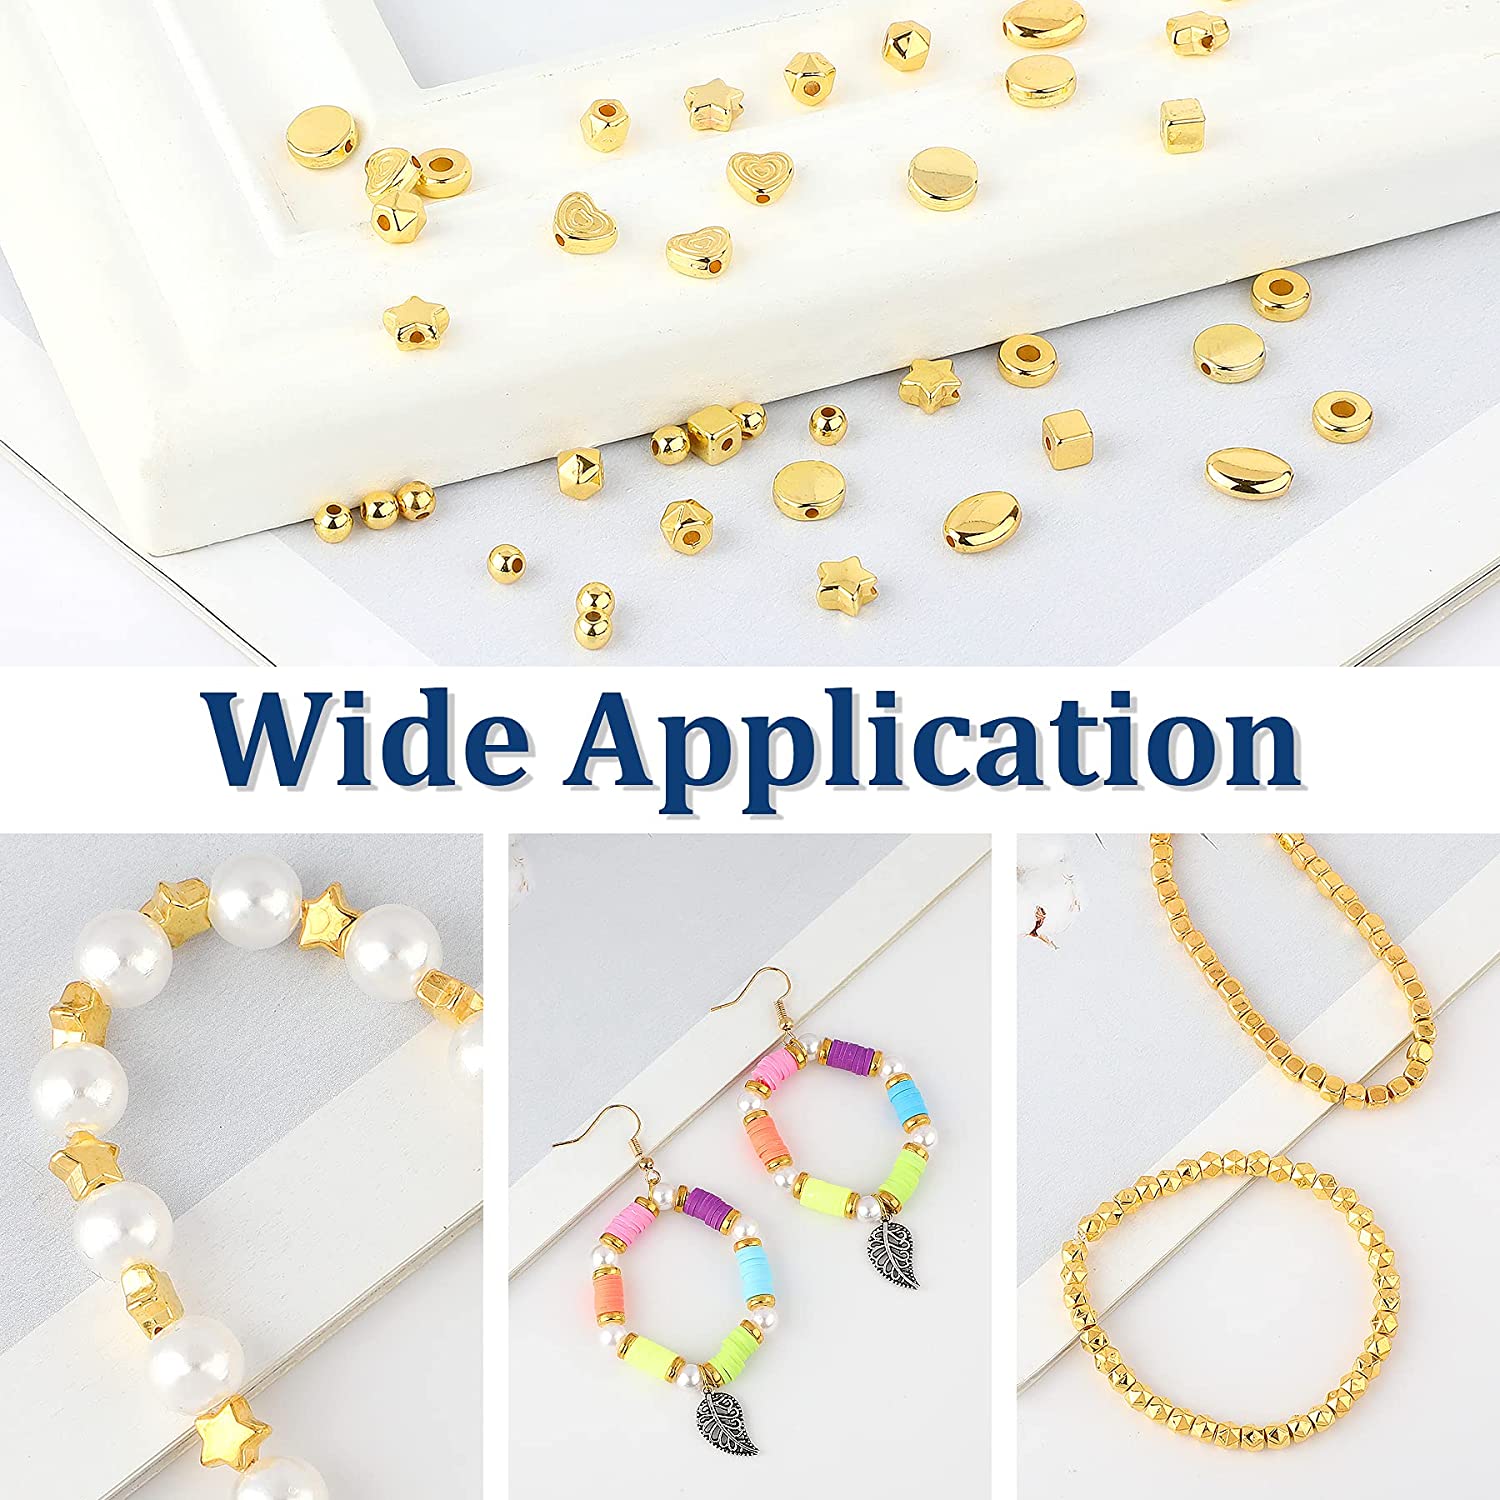 1500Pcs 10 Styles Gold Spacer Beads Assorted Jewelry Making Loose Beads for  DIY Bracelet Necklace Earring Craft Making